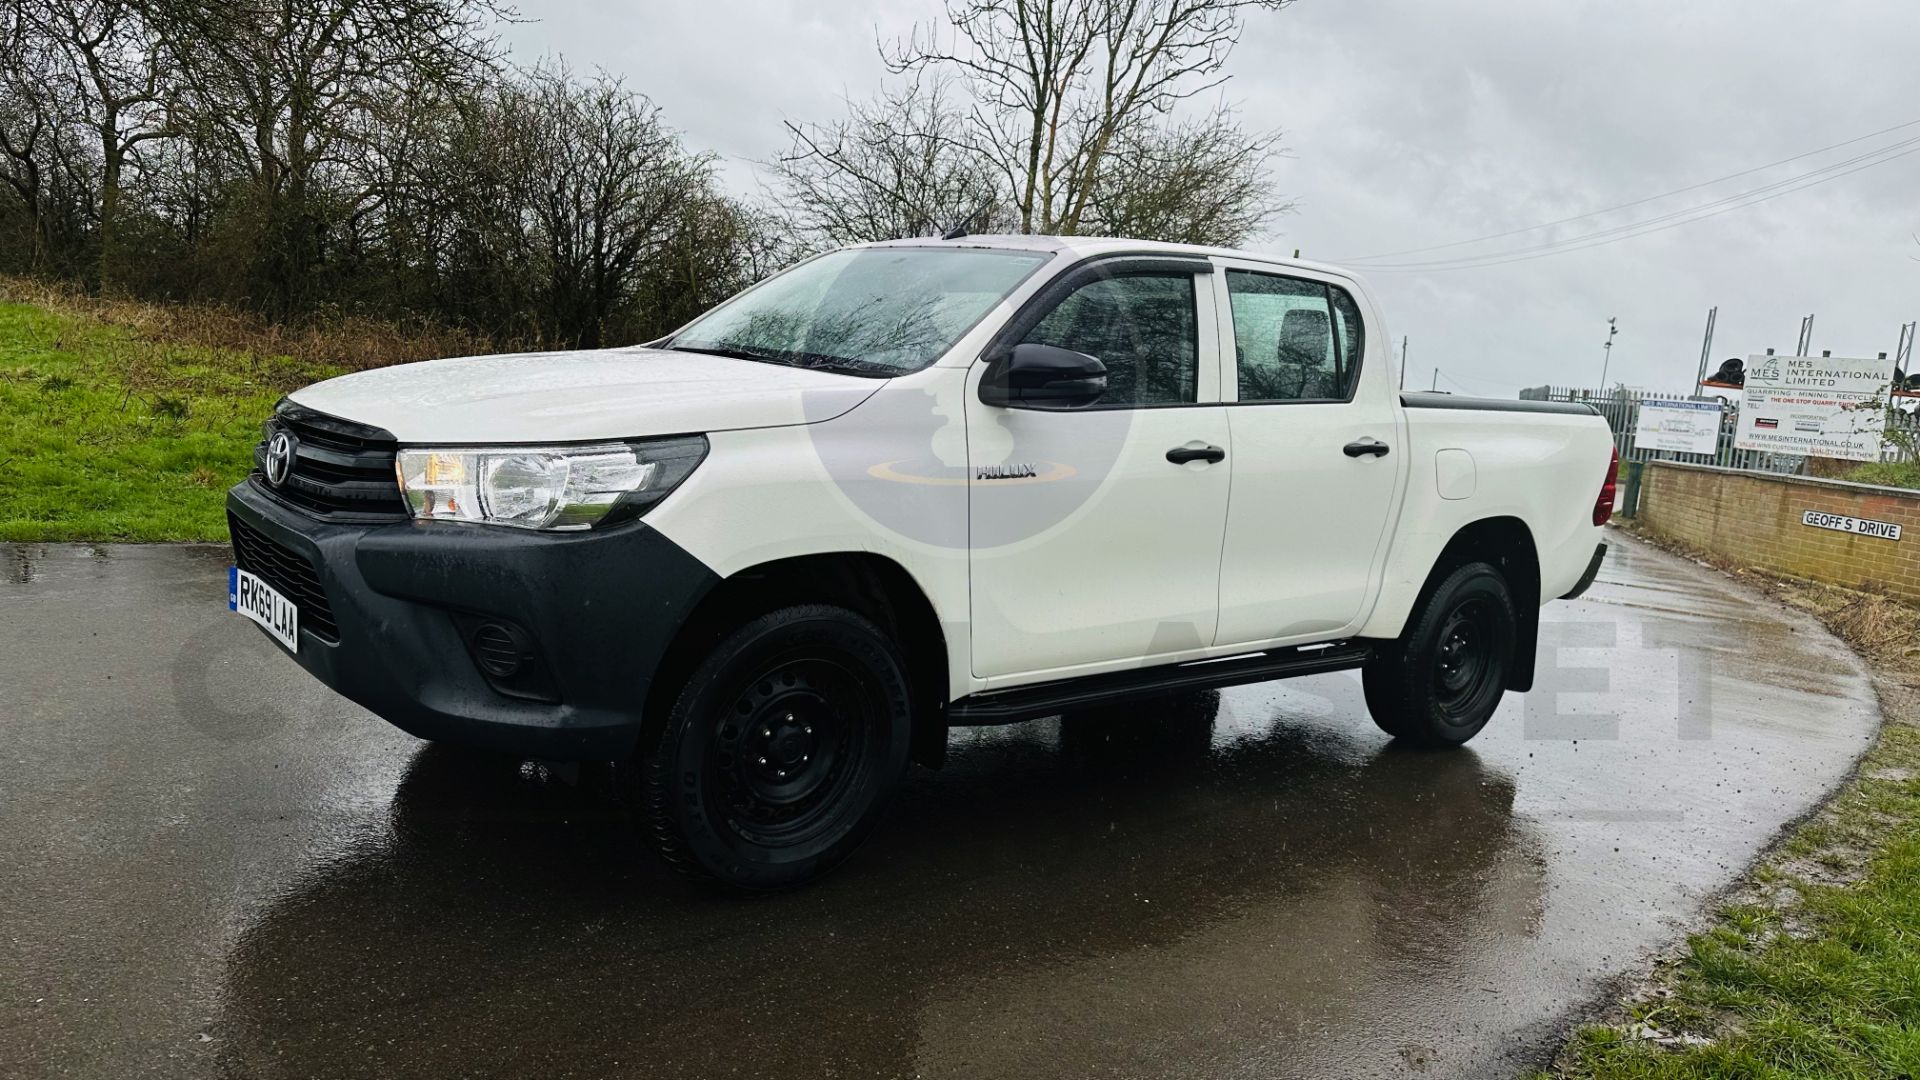 TOYOTA HILUX *DOUBLE CAB PICK-UP* (2020 - EURO 6) 2.4 D-4D - AUTO STOP/START *AIR CON* (1 OWNER) - Image 11 of 48